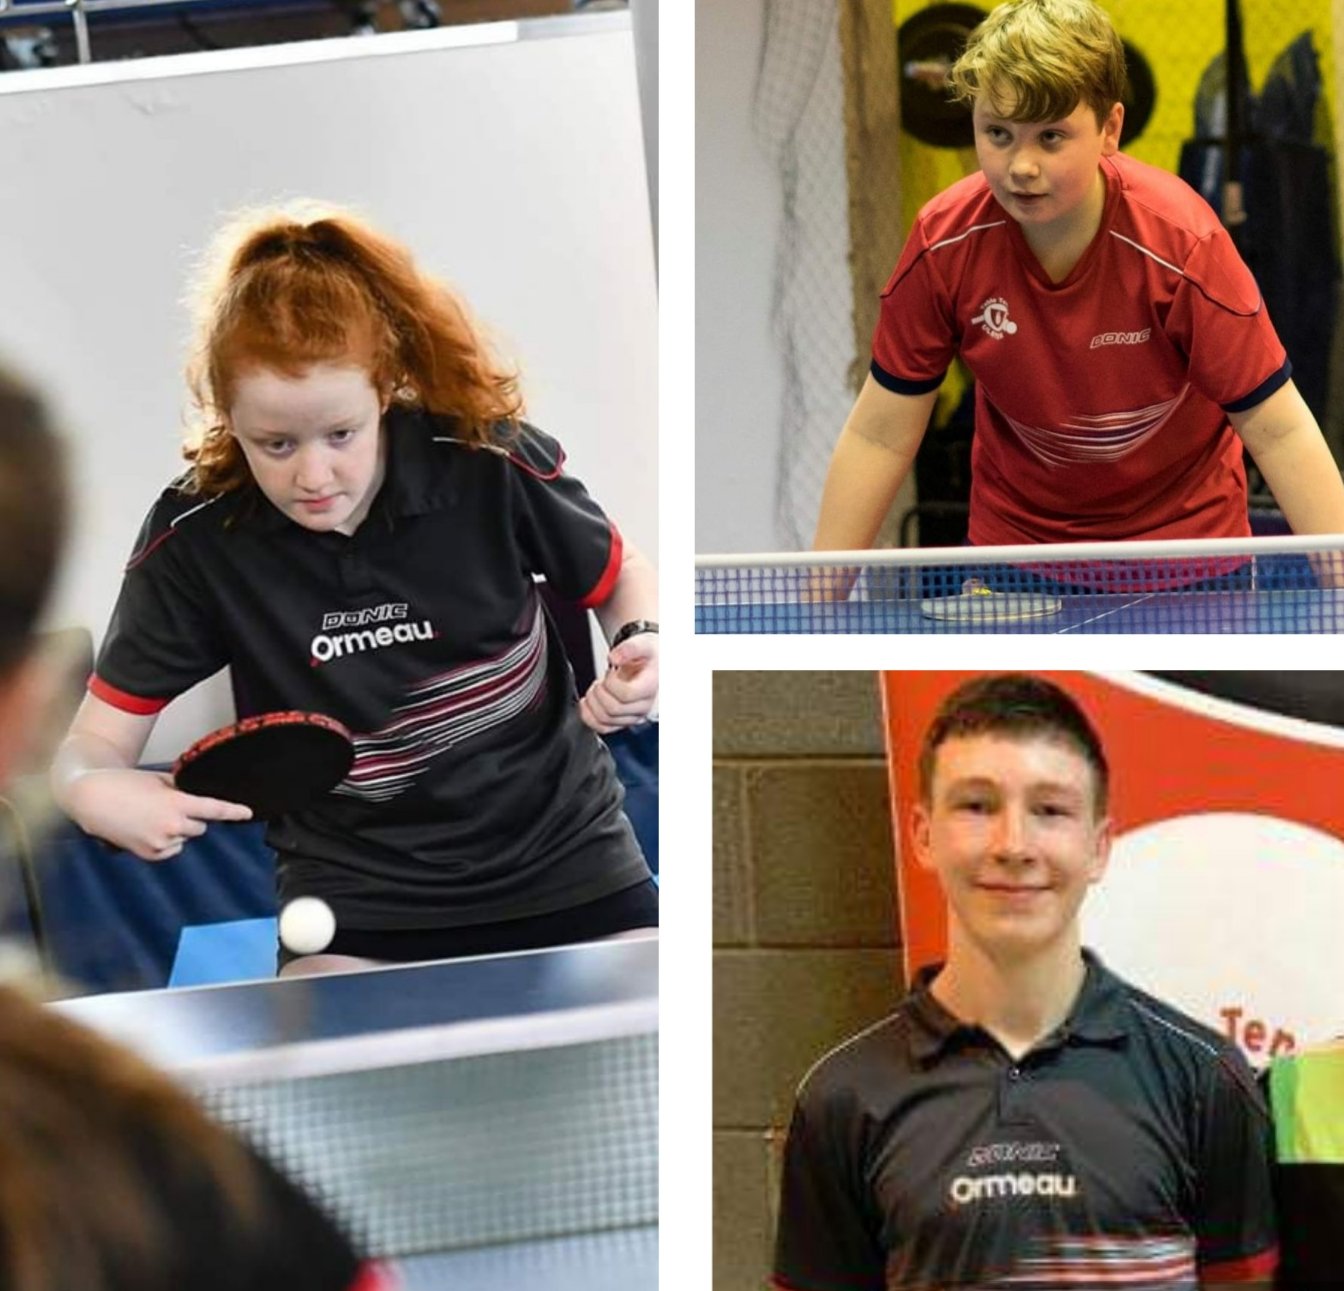 Ormeau Players Selected to  Represent Ireland at Guernsey Senior Schools International.